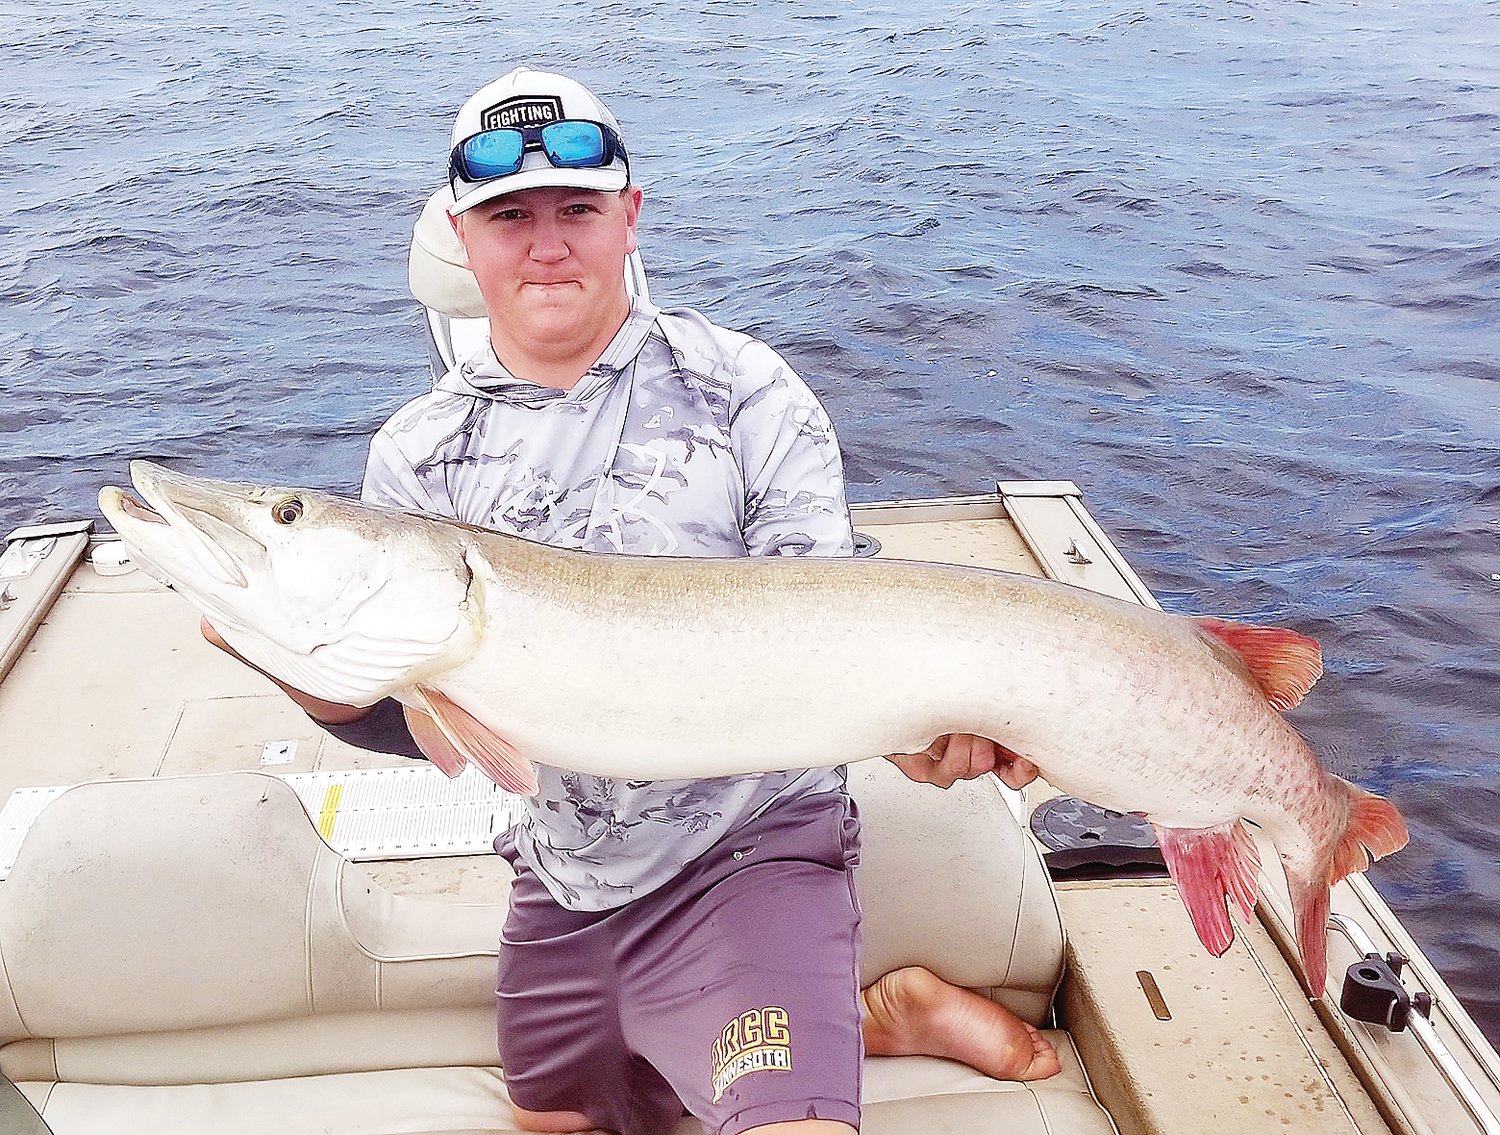 Brrett Vetterkind, of Somerset, Wis. hoists a 
51-1/2 inch musky he caught late last week on Lake Vermilion.